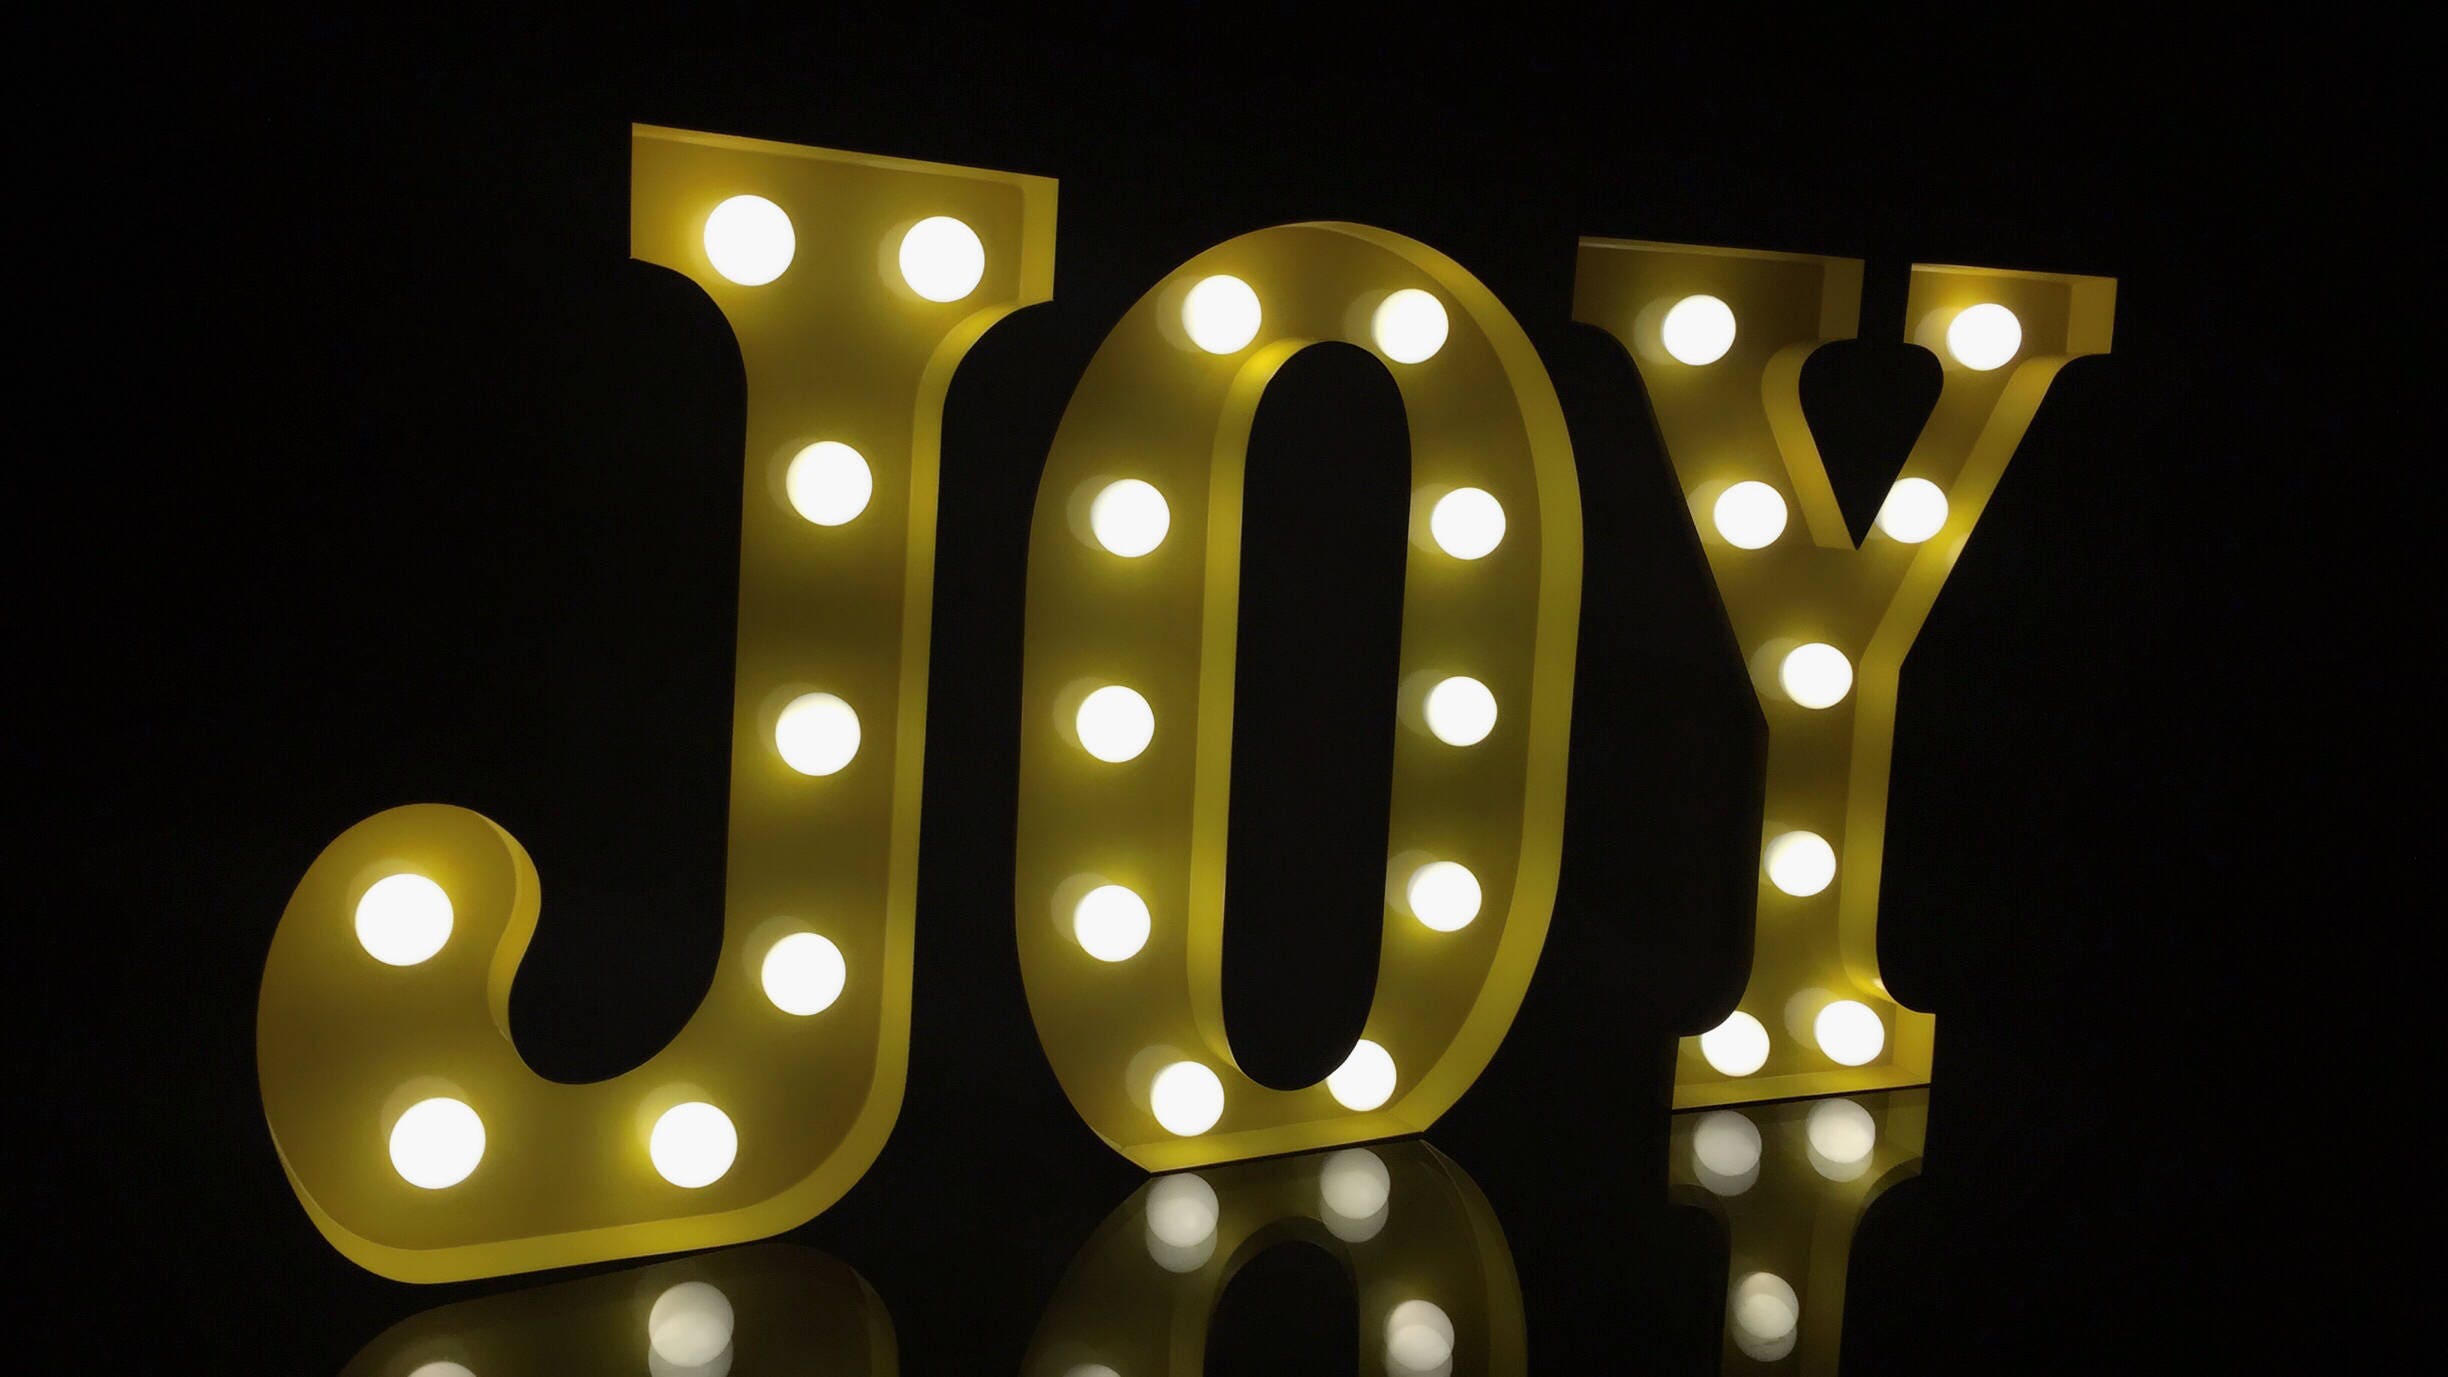 Hand Made 9metal Yellow Light up Letters JOY Home Party | Etsy